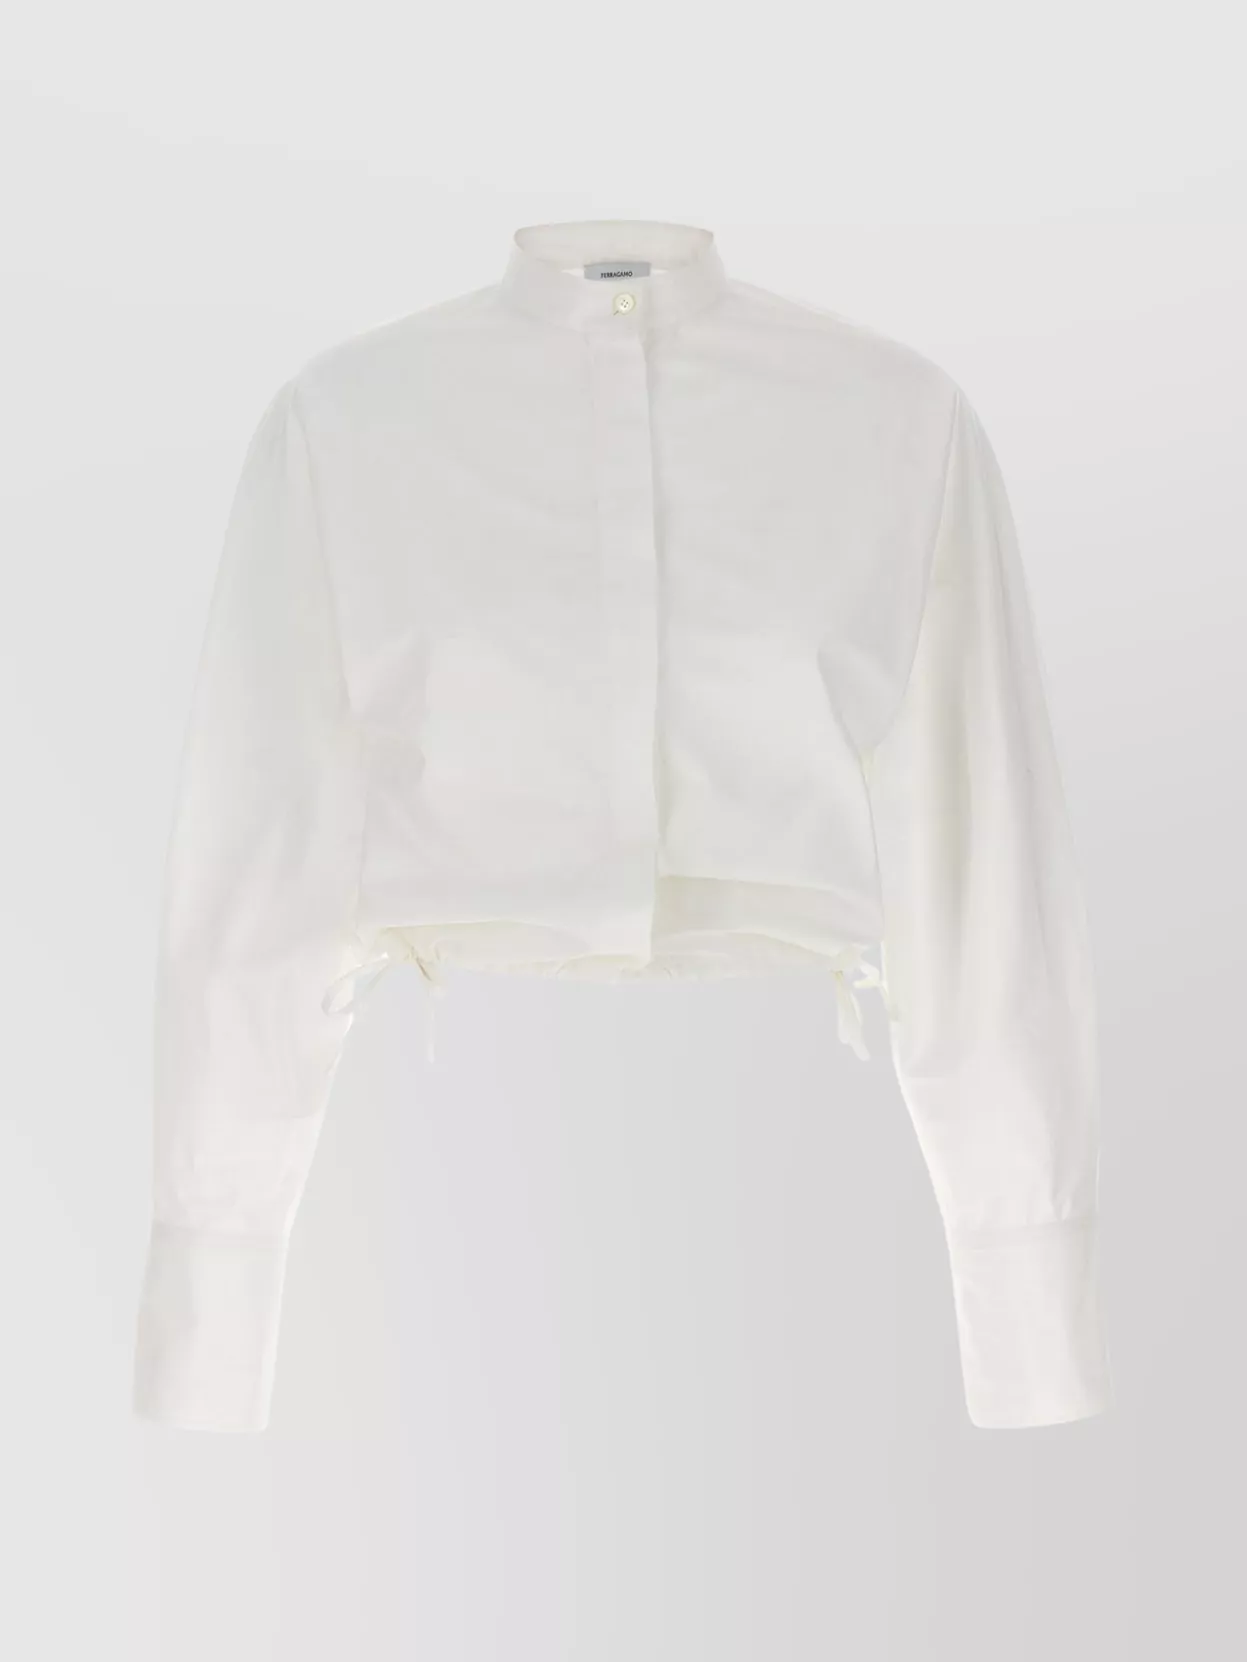 Ferragamo Short Shirt With Drawstring And Collar In White